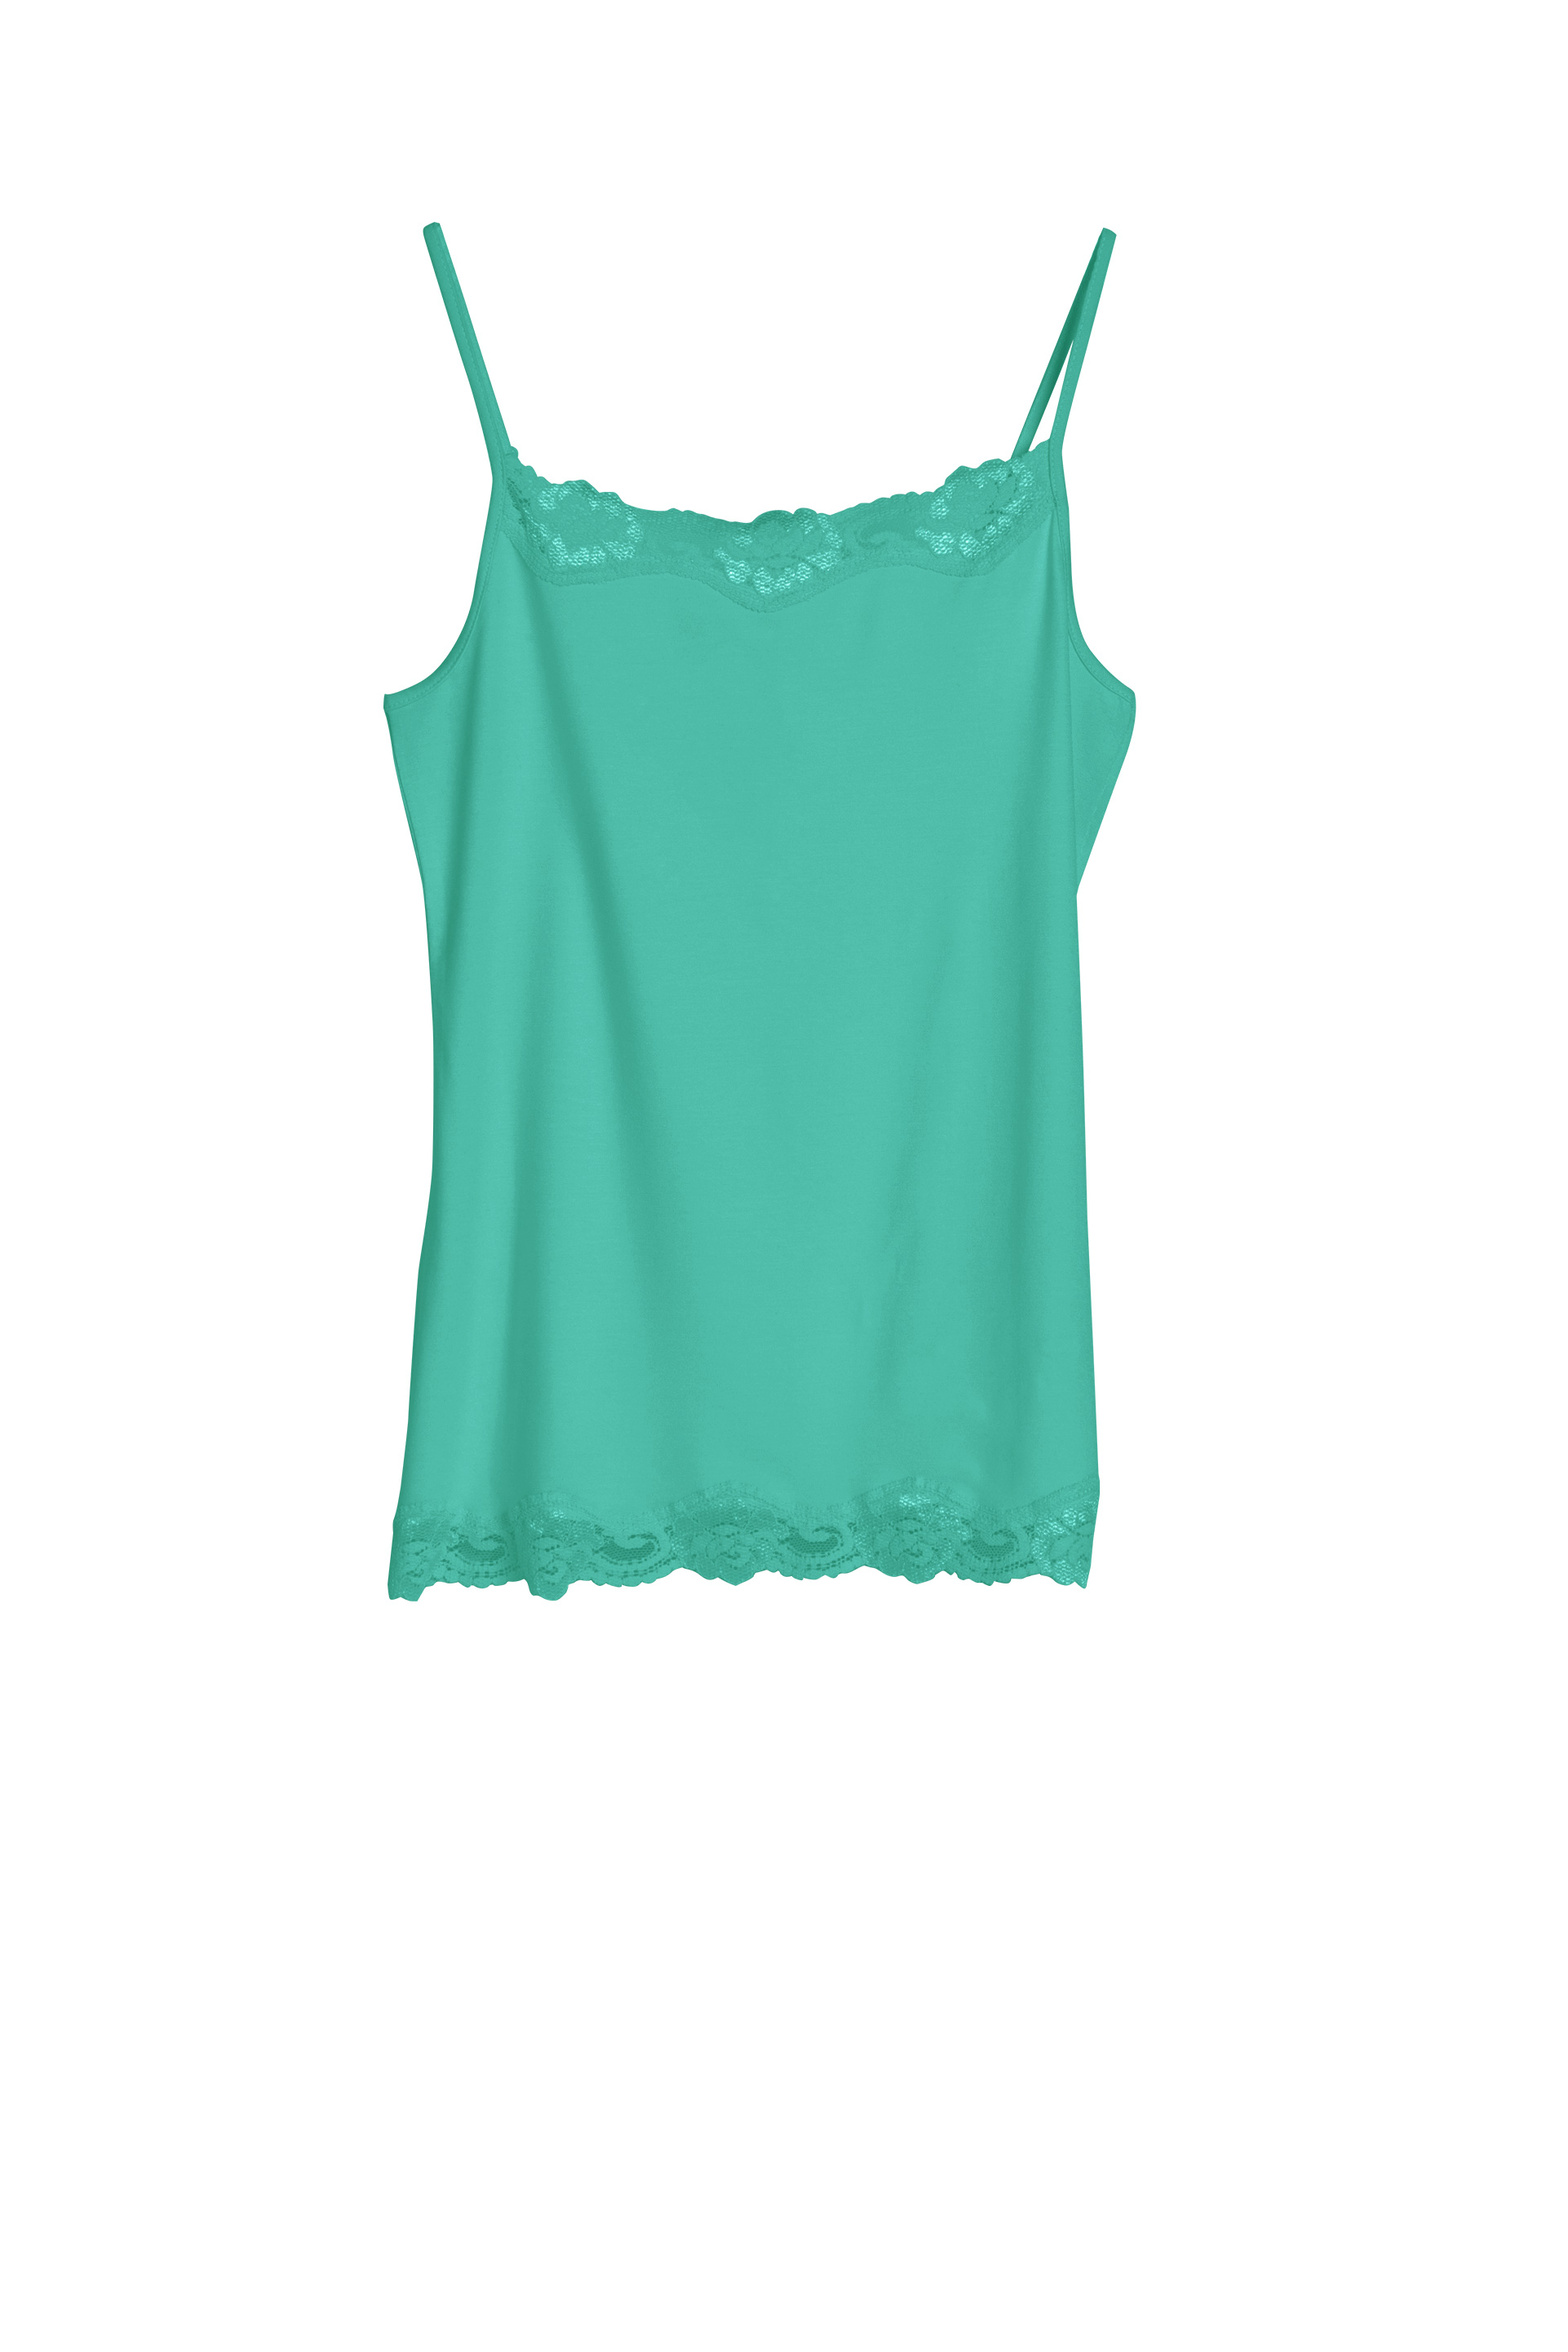 7200_lace_camisole_soft_spruce.jpg